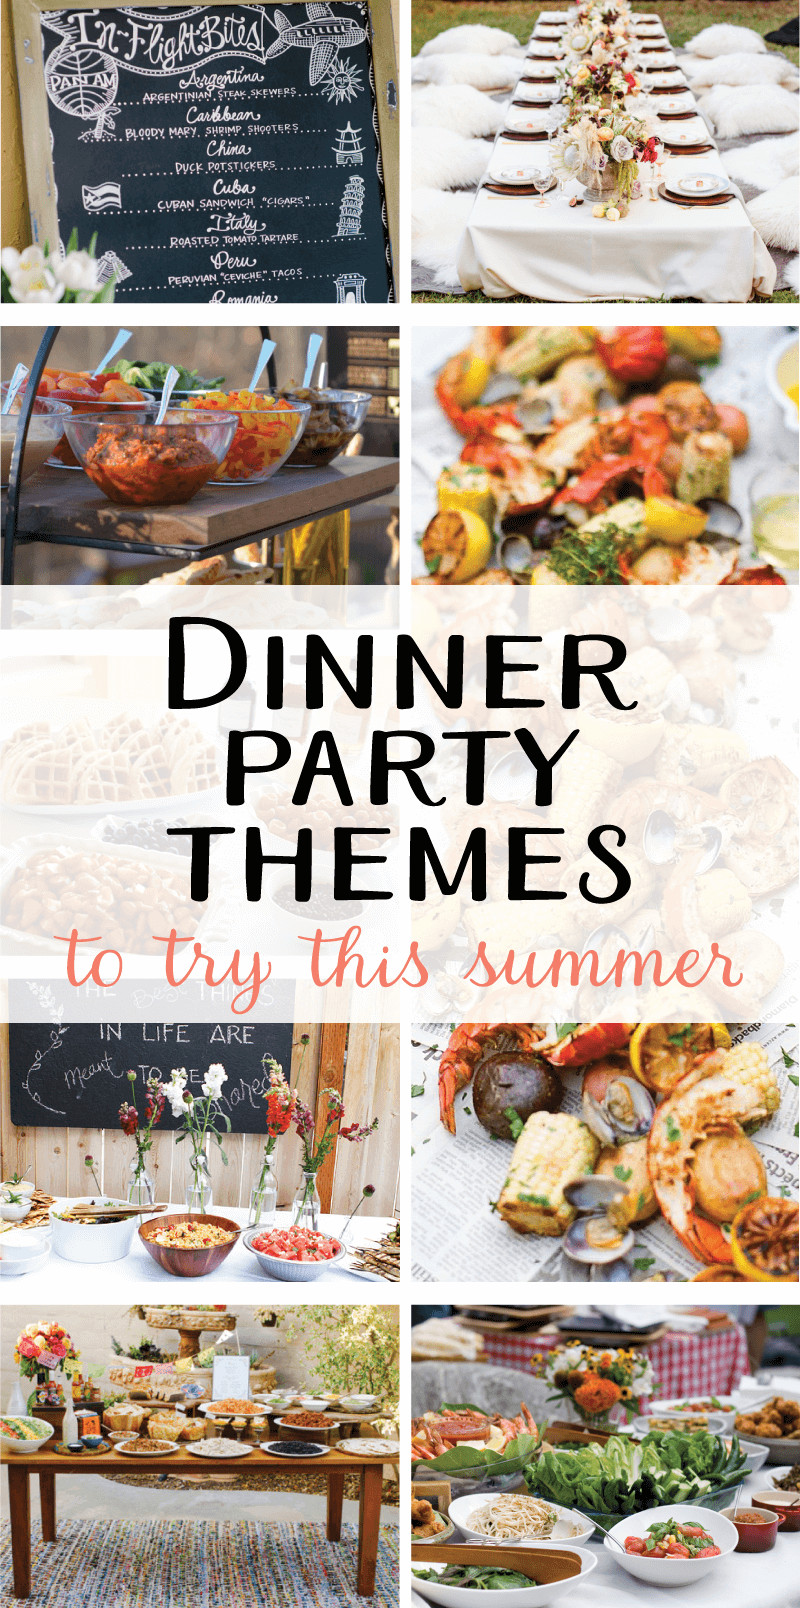 Ideas For A Dinner Party
 9 Creative Dinner Party Themes to Try this Summer on Love